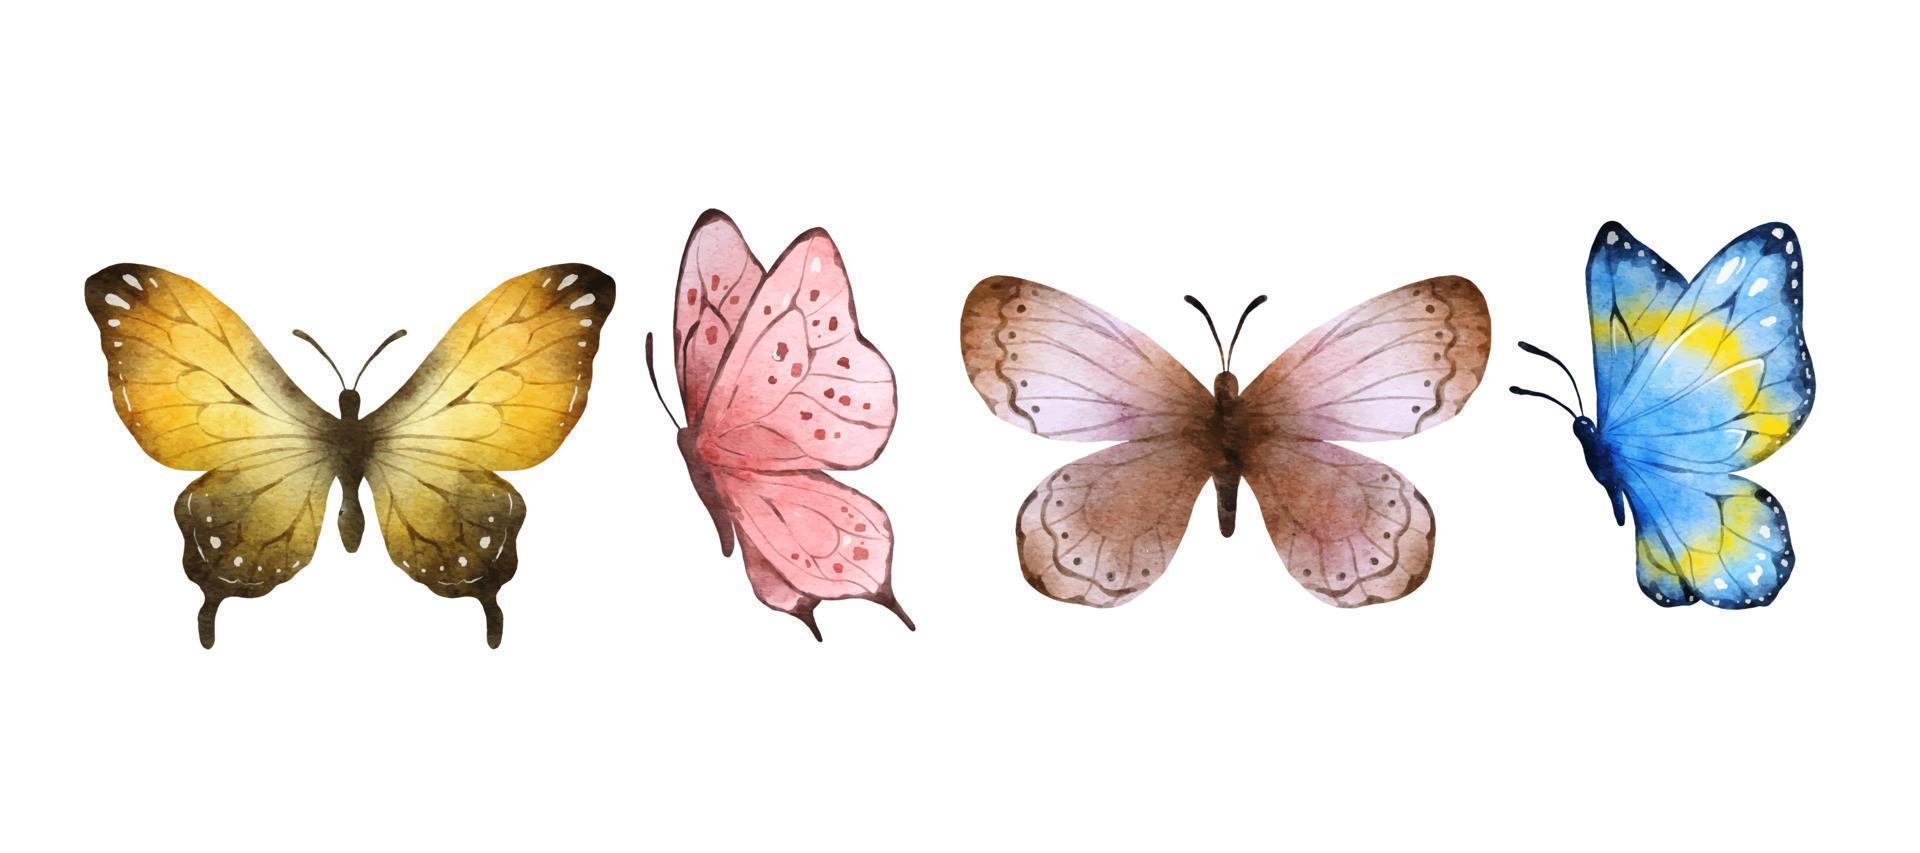 Digital Painting Colorful butterflies watercolor isolated on white background. Orange, pink, yellow brown and blue butterfly. Spring animal vector illustration